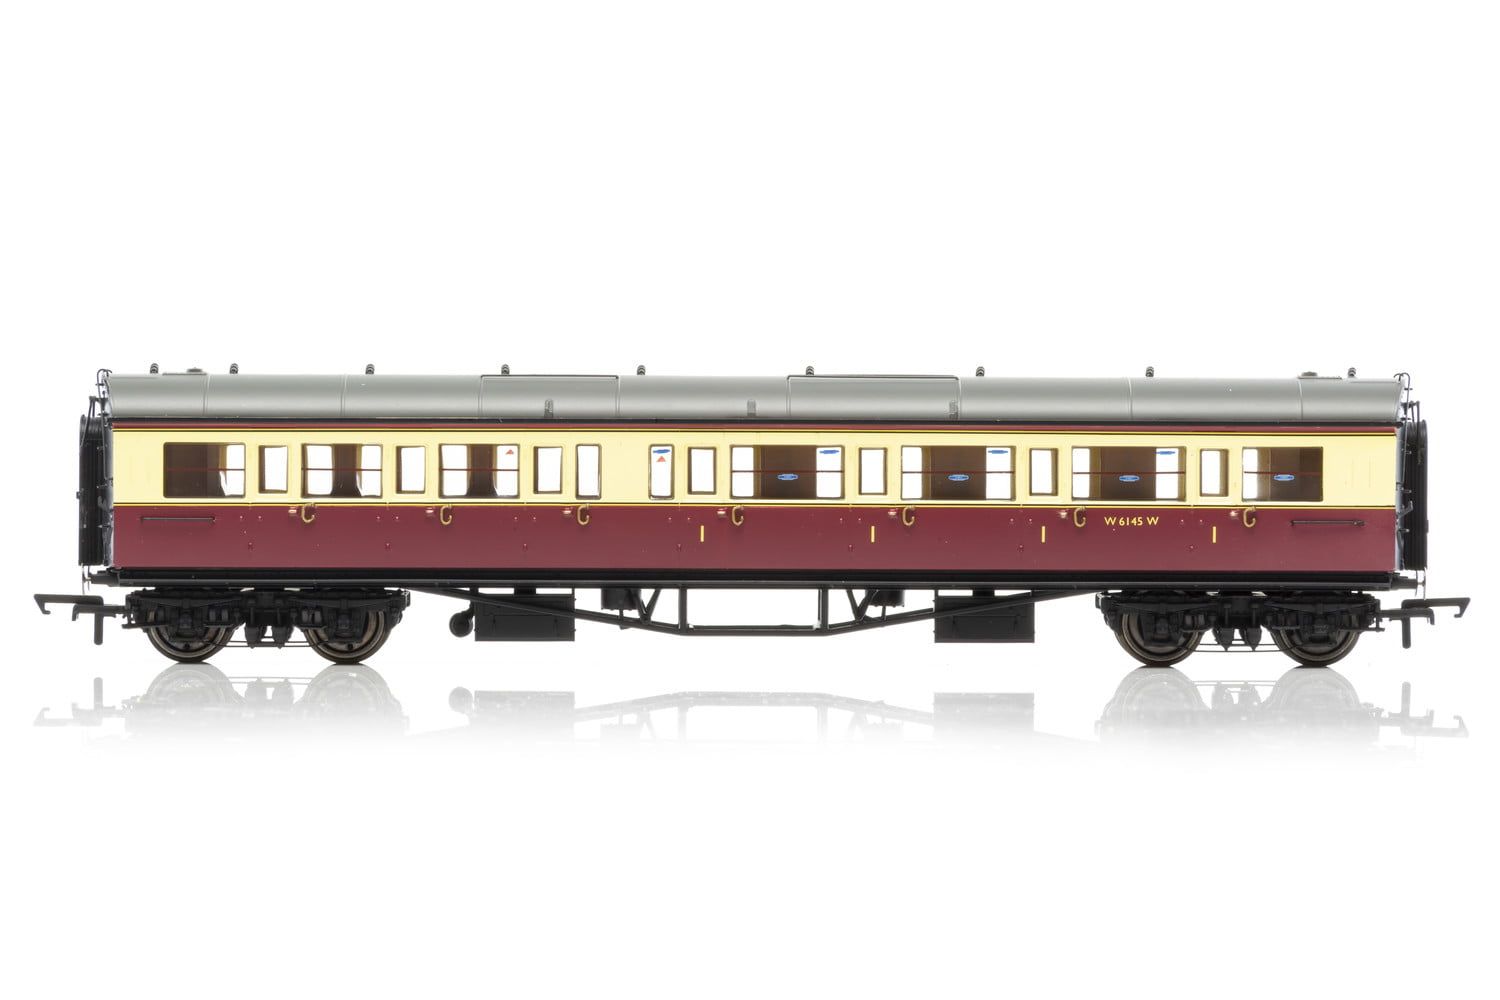 Hornby BR, Collett 'Bow-Ended' Corridor Composite (Right Hand), W6145W - Era 4 OO Gauge